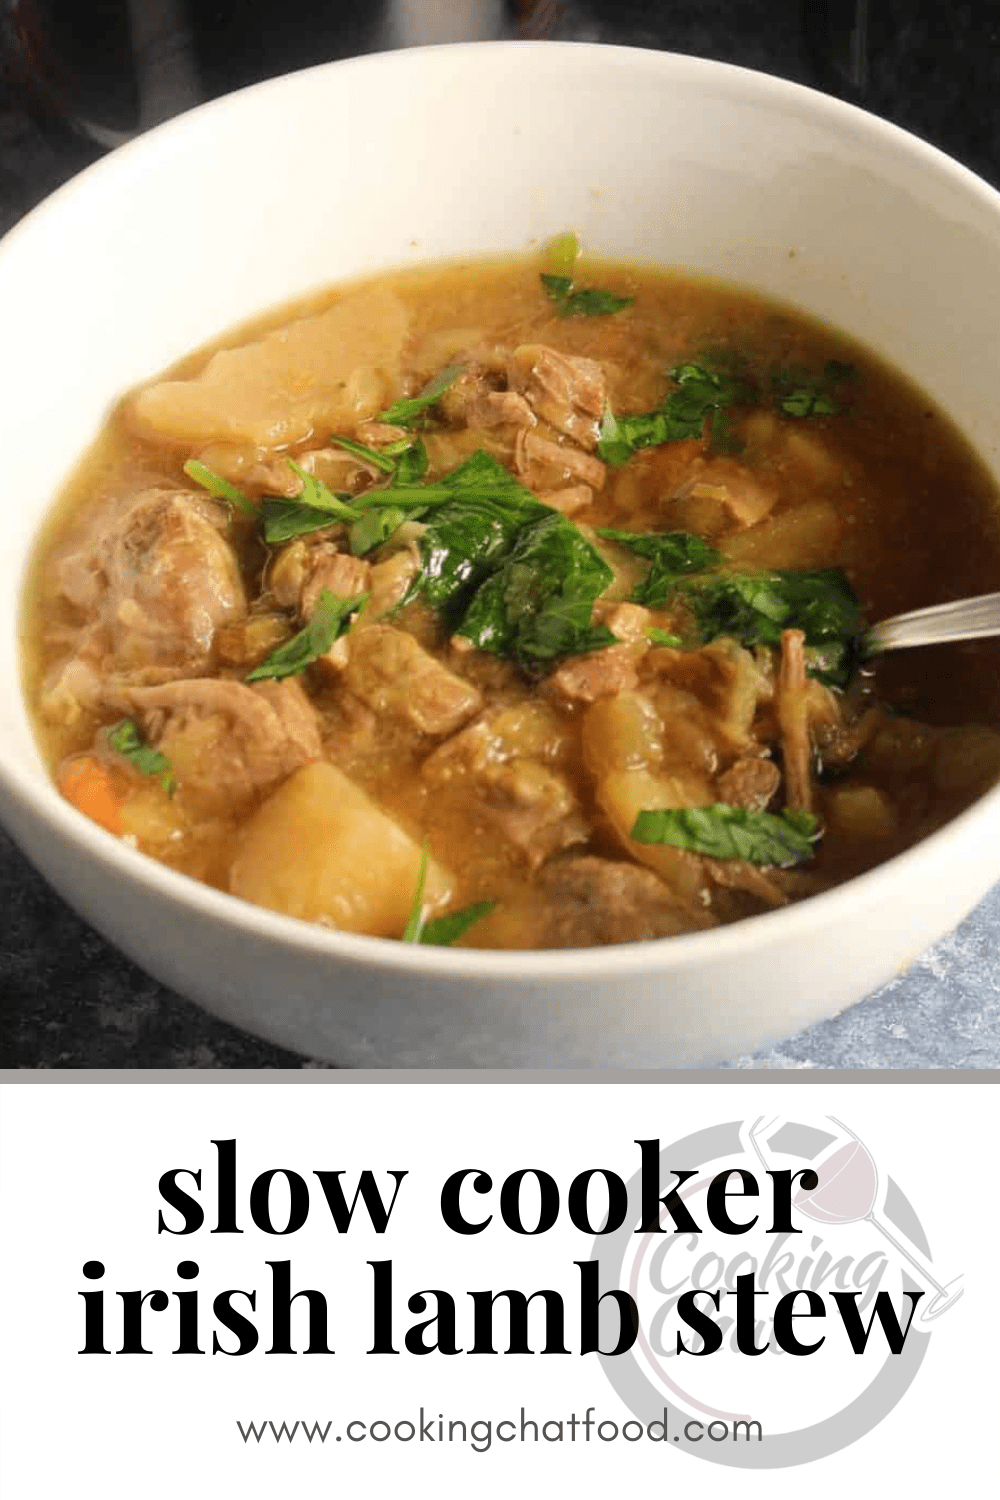 Irish Lamb Stew in a white bowl, with text underneath with the recipe title.